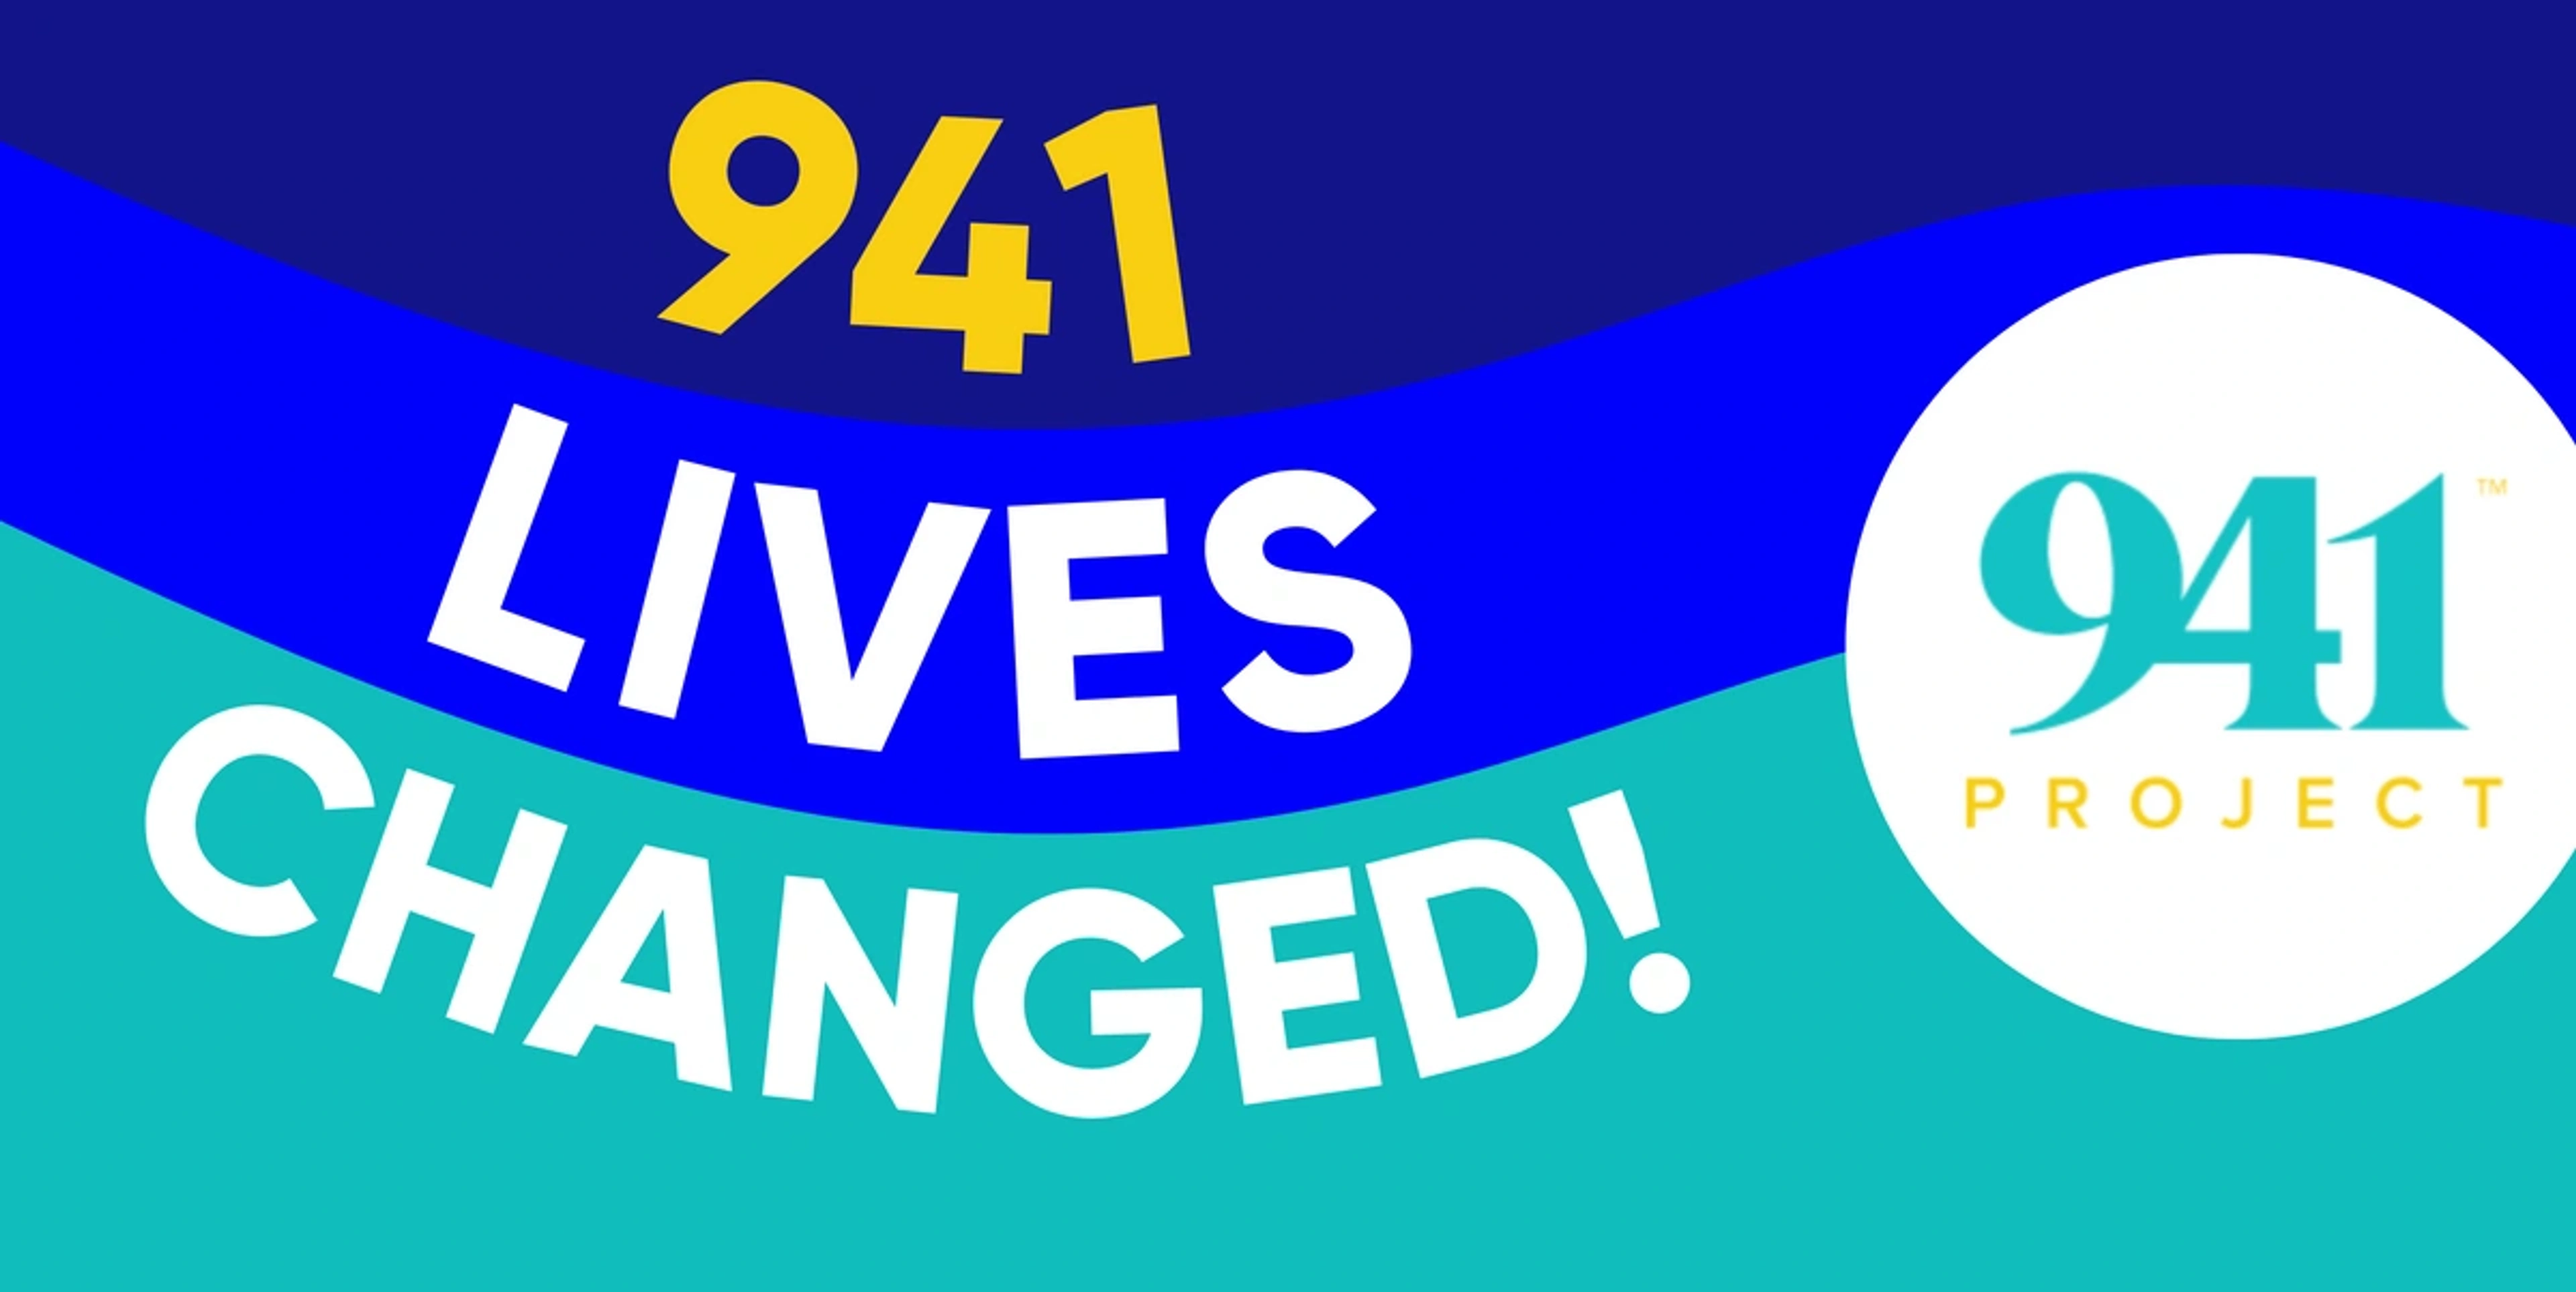 Image with the 941 Project logo that says "941 Lives Changed!"